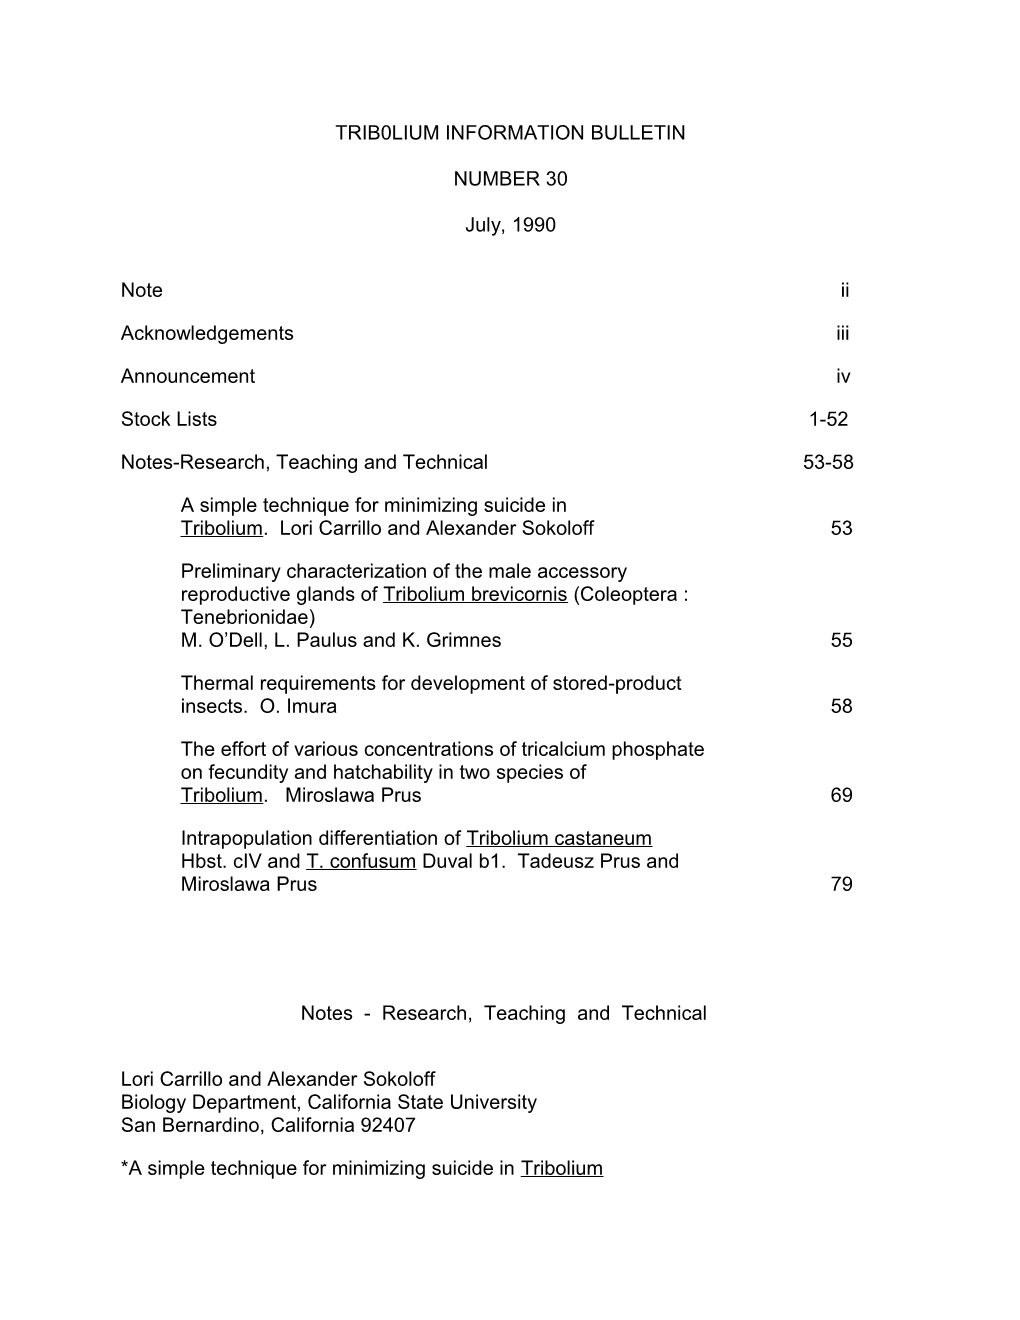 Notes-Research, Teaching and Technical 53-58